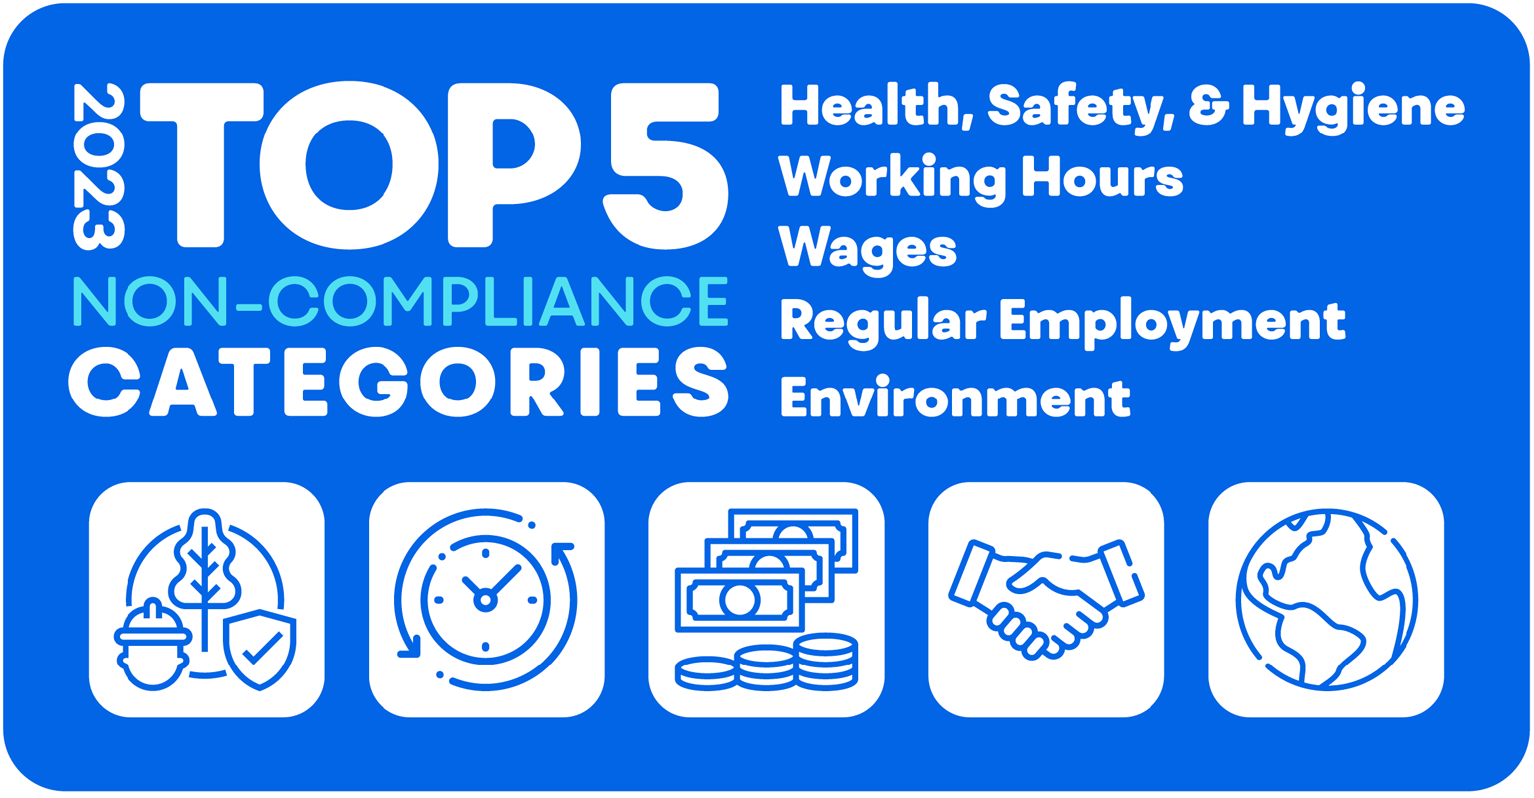 2023 Top 5 non-compliance categories: Health, Safety, & Hygiene; Working Hours; Wages; Regular Employment; and Environment.